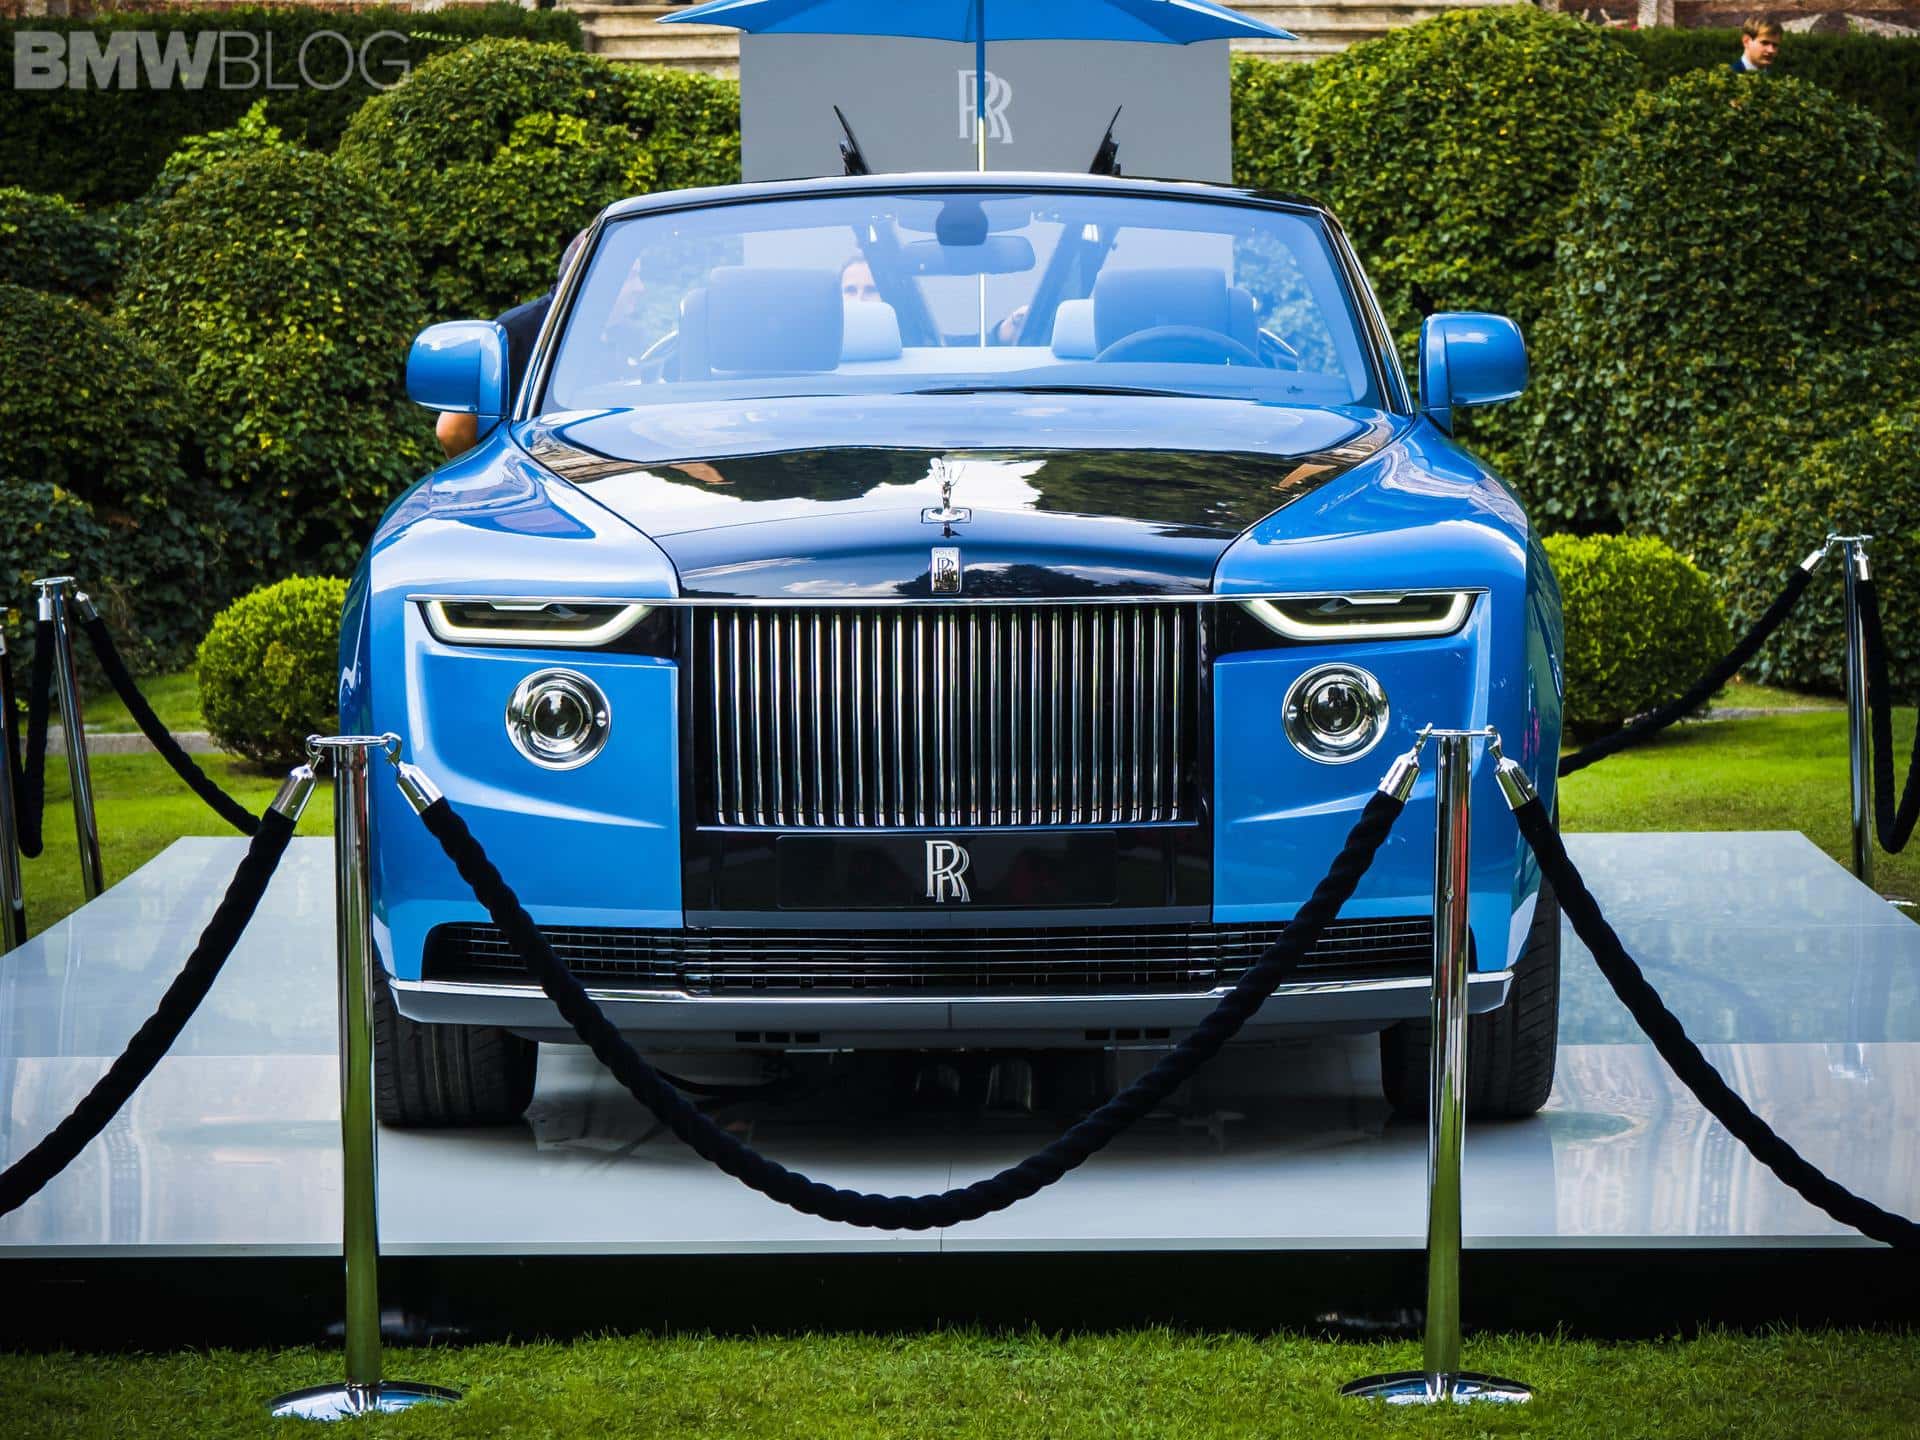 The RollsRoyce Ghost was so eerily quiet inside the engineers had to make  it louder  CNN Business